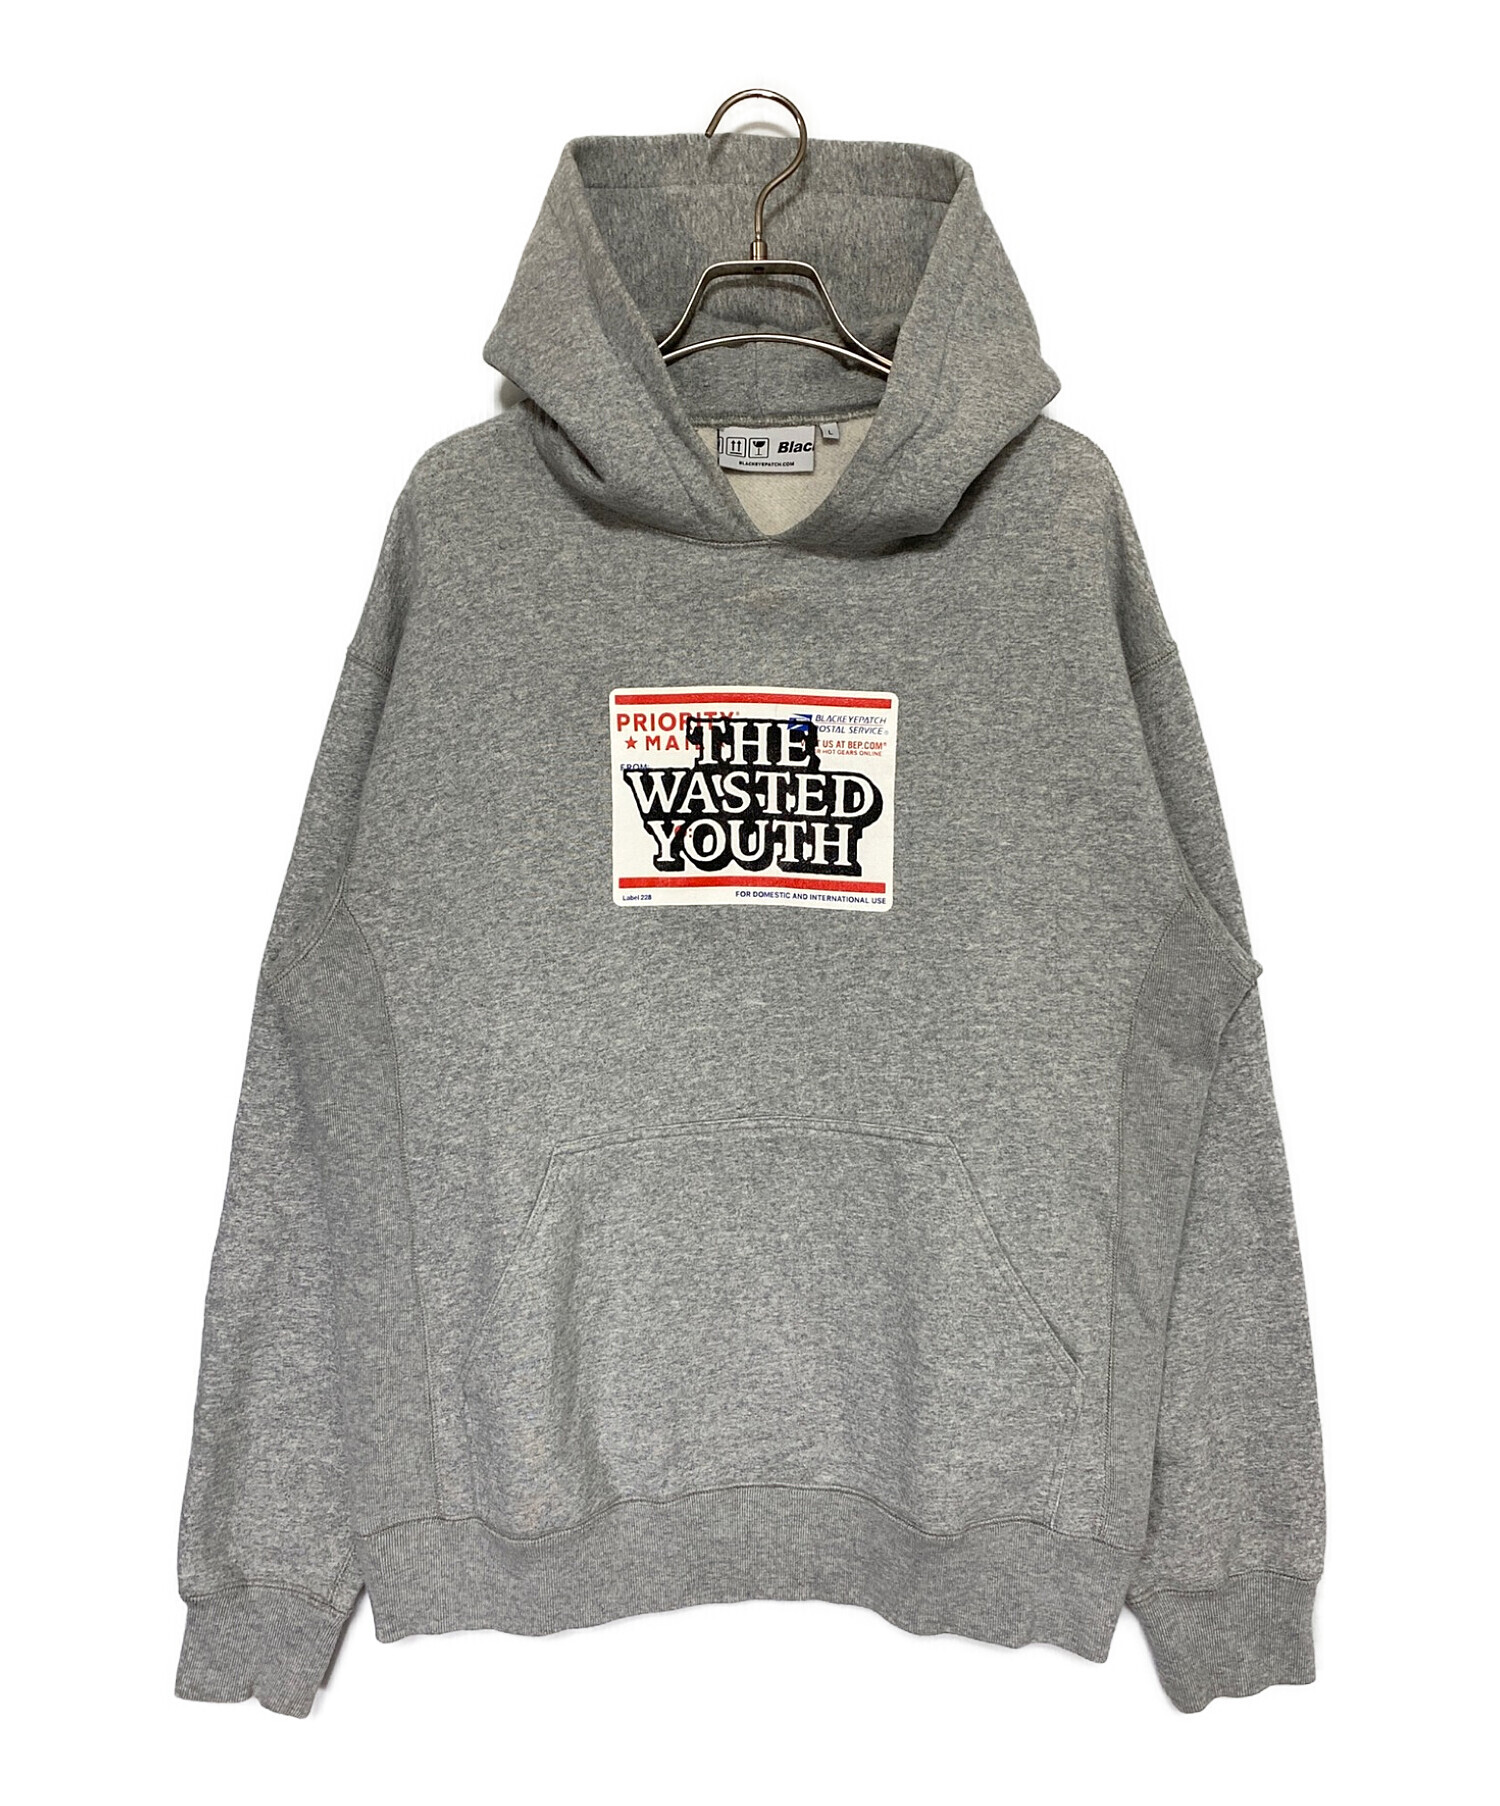 Wasted Youth PRIORITY LABEL HOODIE Lサイズ - パーカー